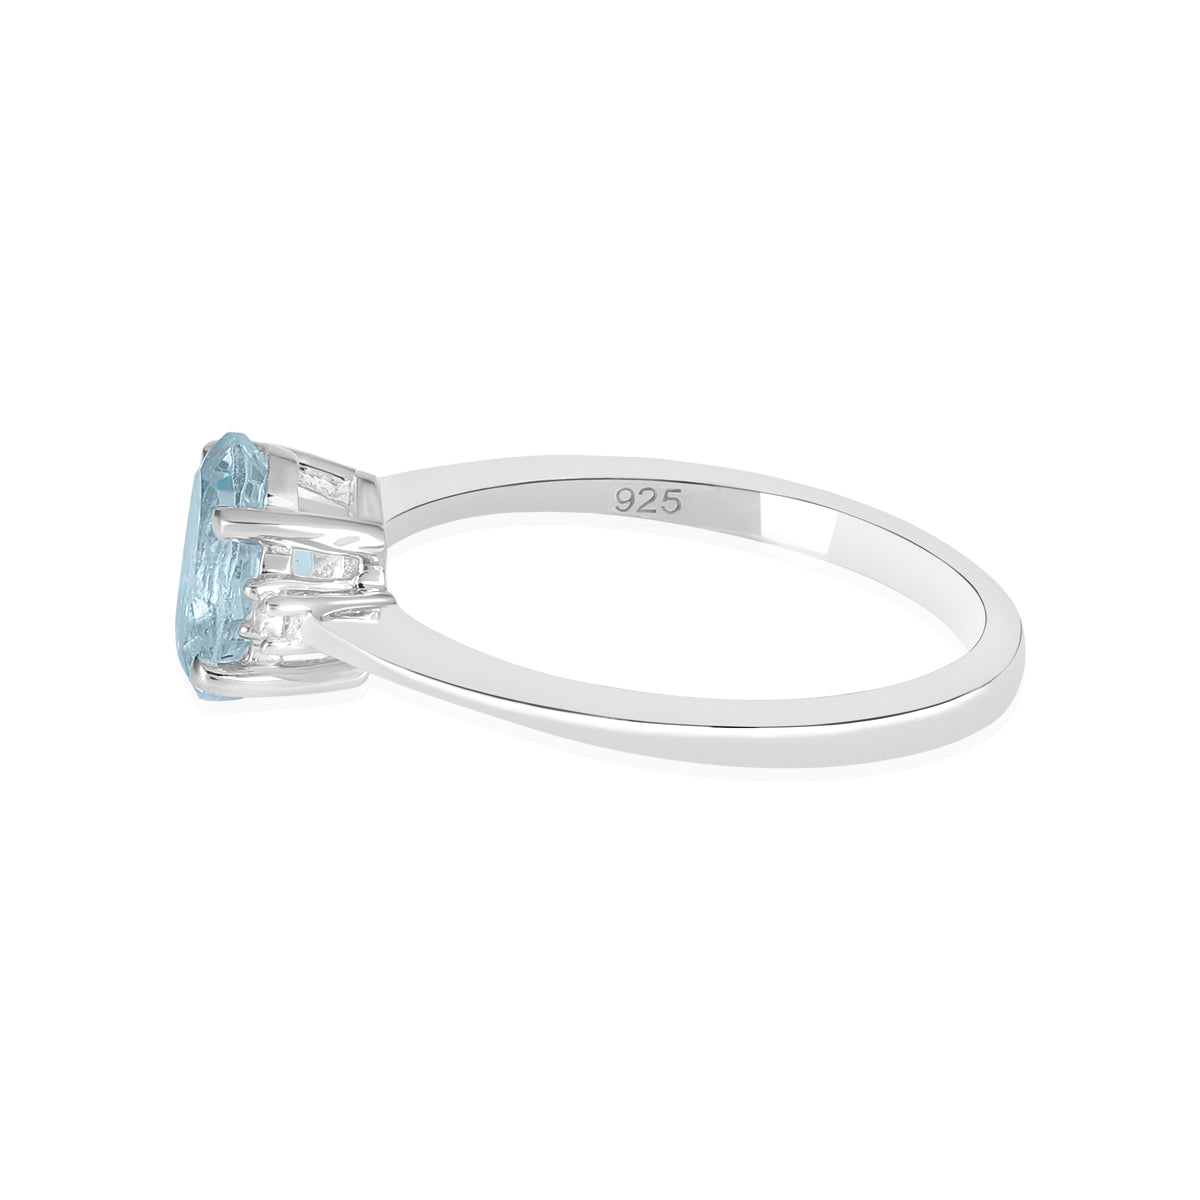 Blue Topaz with Accents Silver Ring